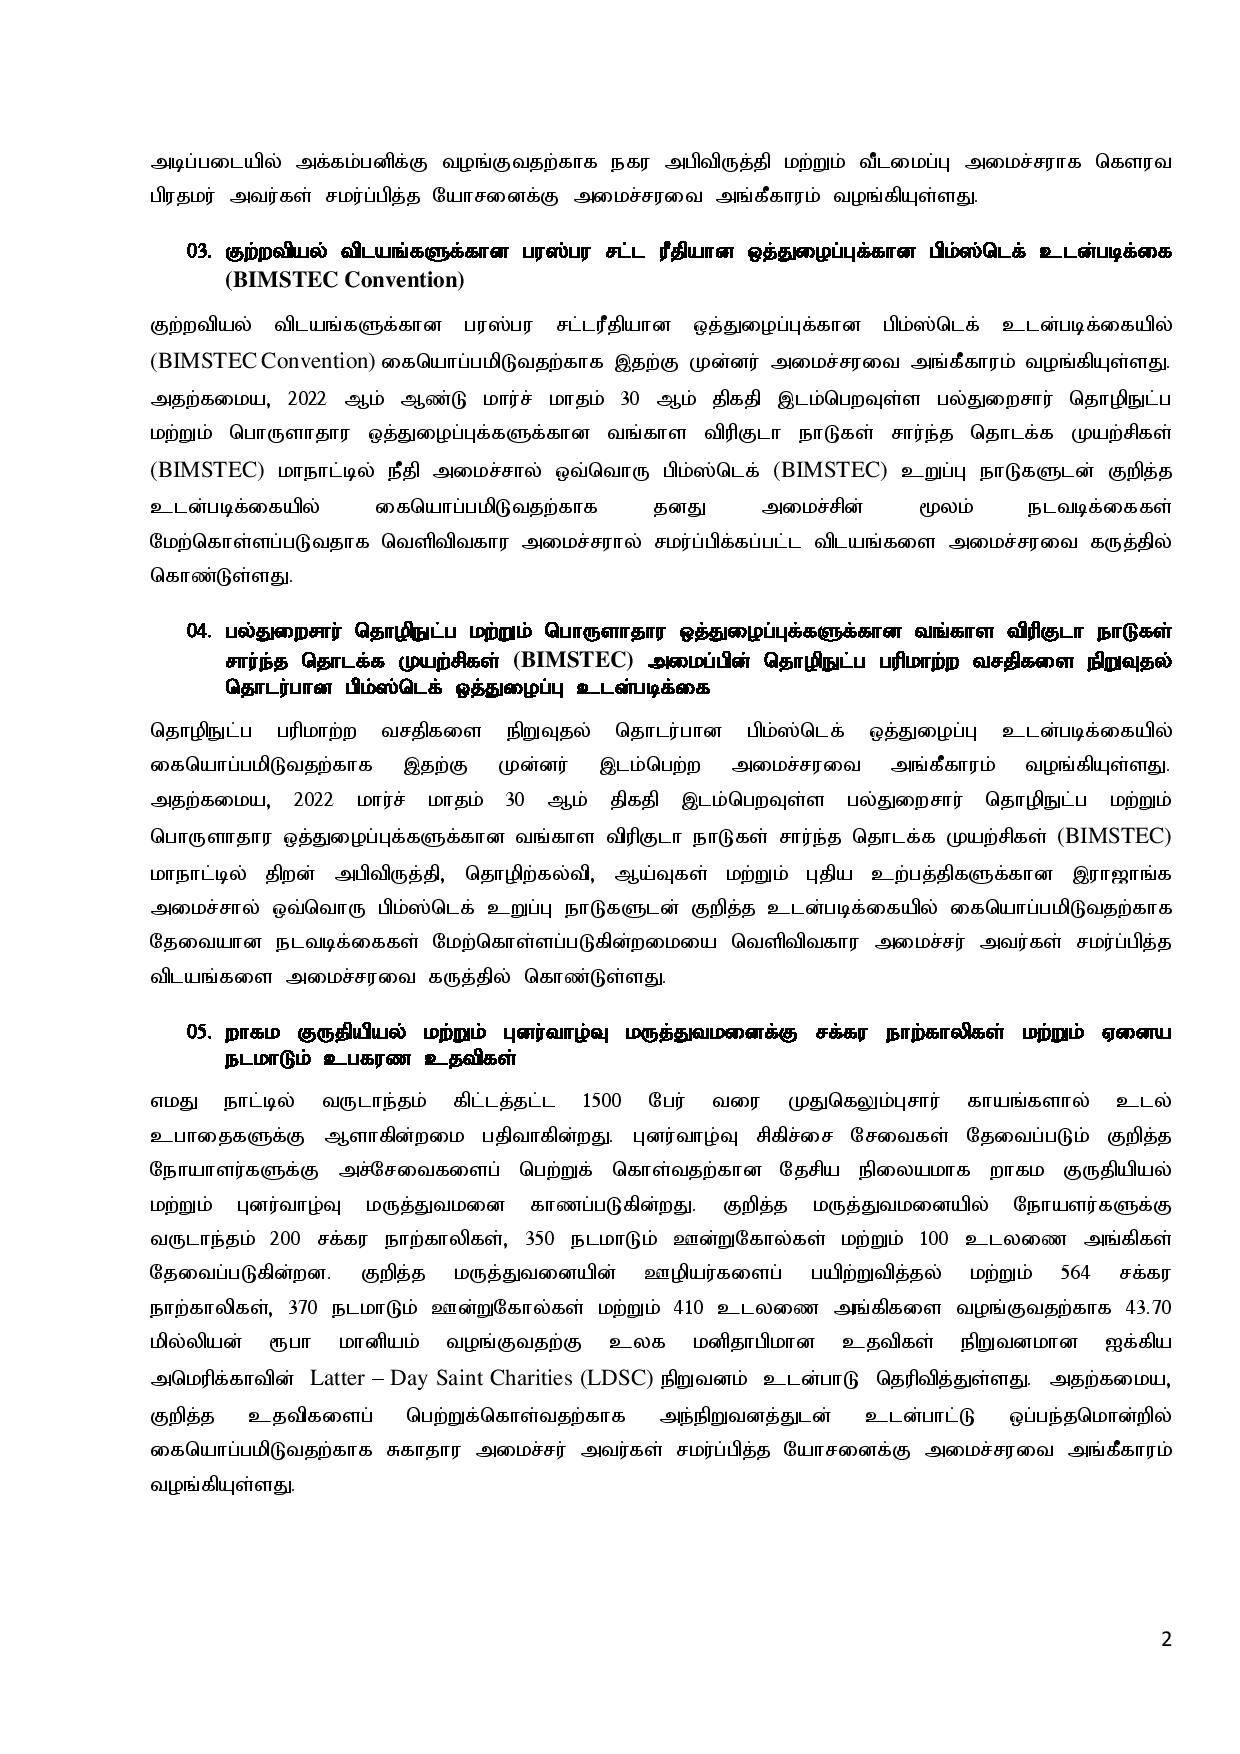 Cabinet Decisions on 07.03.2022 T page 002